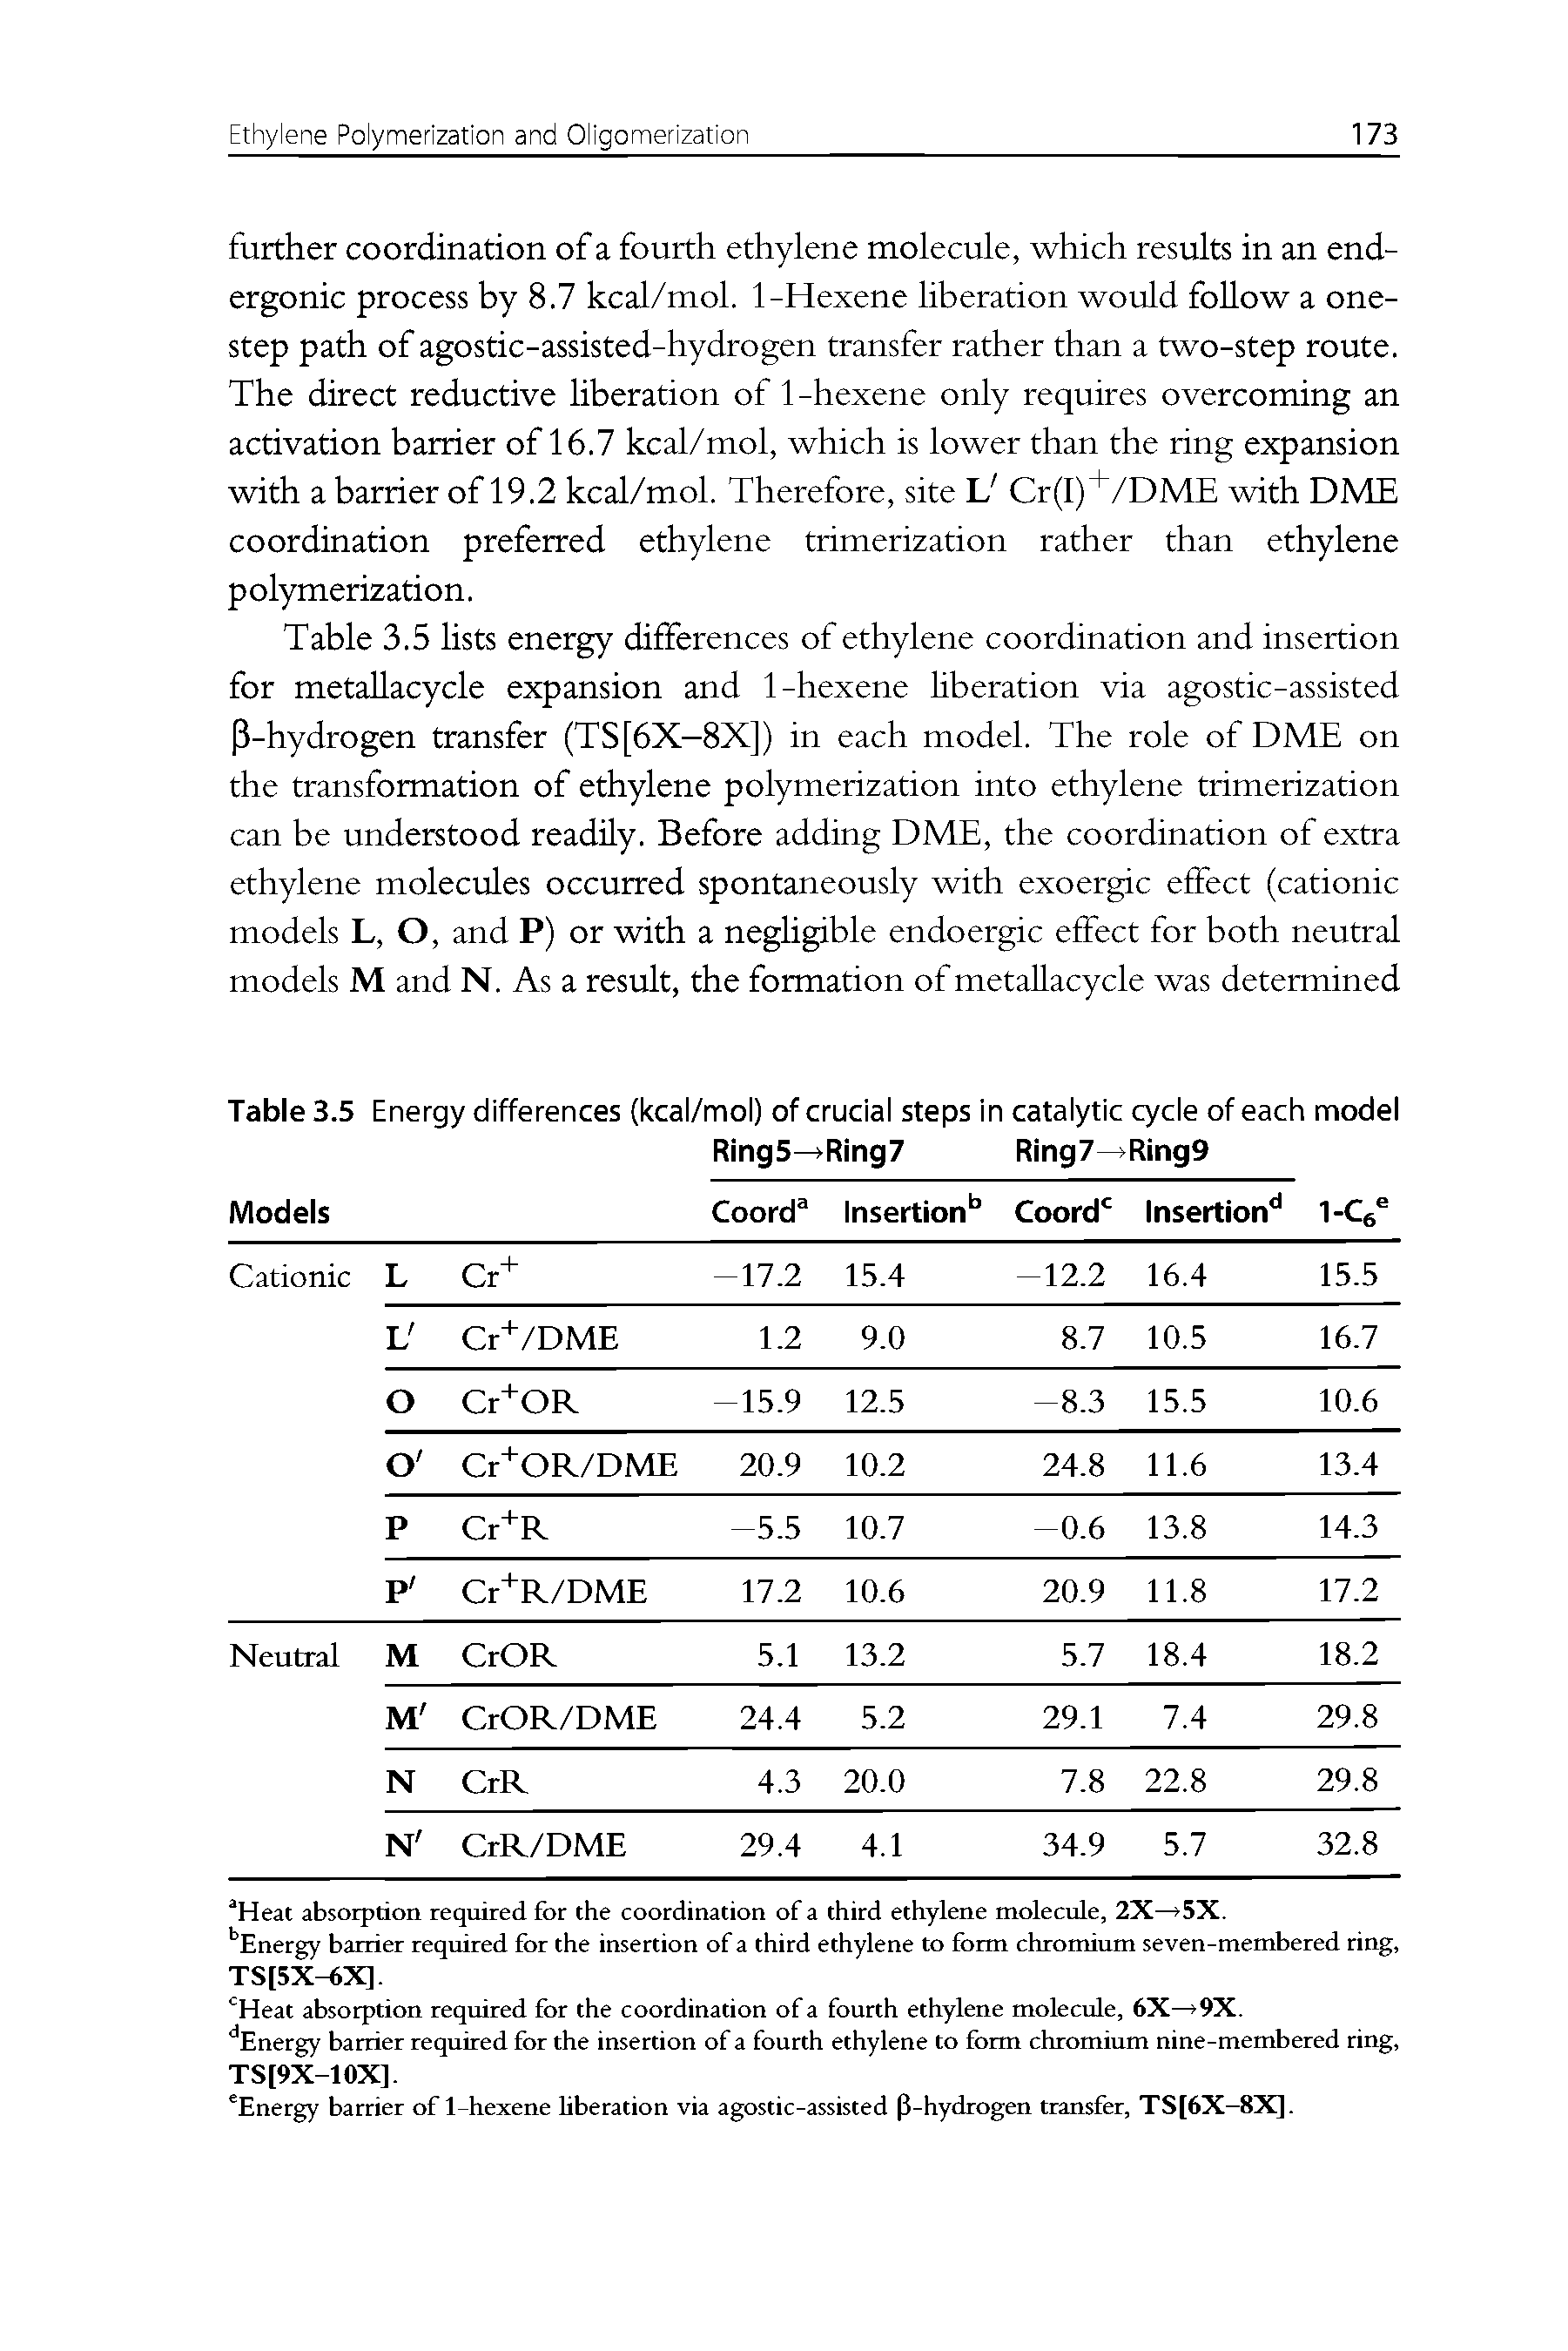 Table 3.5 Hsts energy differences of ethylene coordination and insertion for metahacycle expansion and 1-hexene hberation via agostic-assisted P-hydrogen transfer (TS[6X—8X]) in each model. The role of DME on the transformation of ethylene polymerization into ethylene trimerization can be understood readily. Before adding DME, the coordination of extra ethylene molecules occurred spontaneously with exoergic effect (cationic models L, O, and P) or with a neghgible endoergic effect for both neutral models M and N. As a result, the formation of metahacycle was determined...